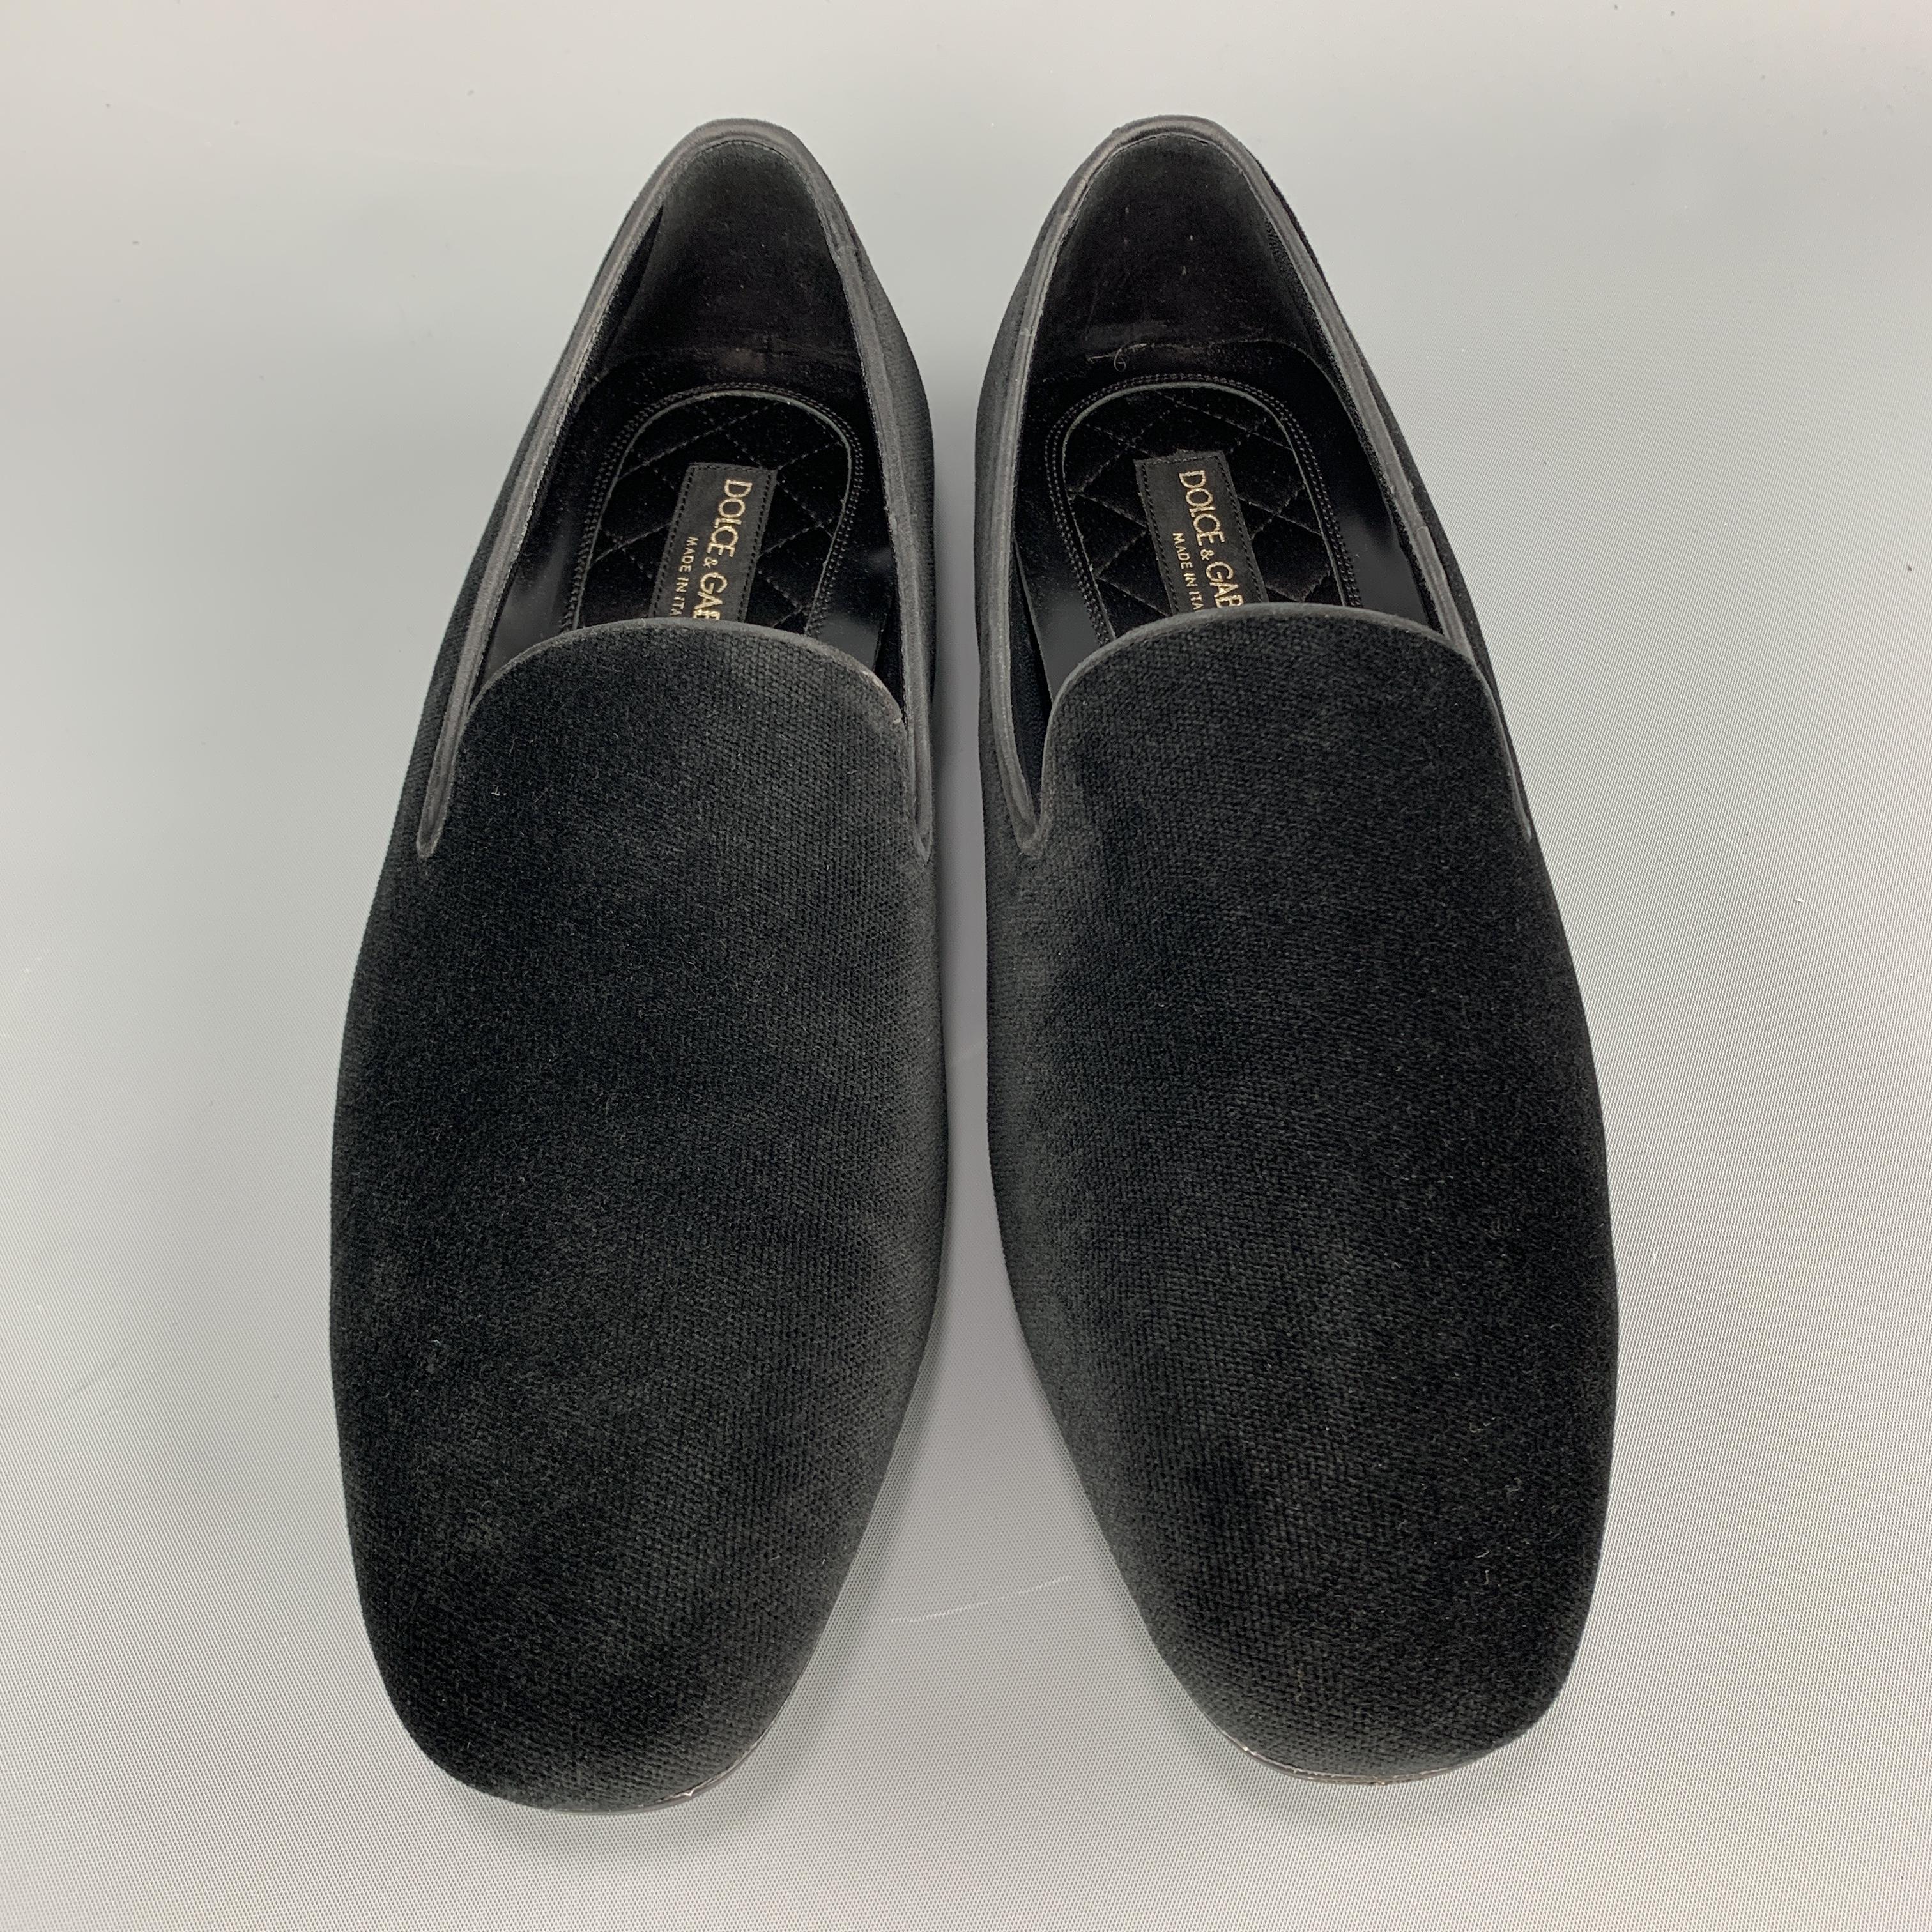 DOLCE & GABBANA tuxedo slippers come in black velvet with a rubber sole and leather piping. Made in Italy.

Original Retail Price: $595.00

New in Box. 
Marked: UK 8.5

Outsole: 11.75 x 3.75 in.